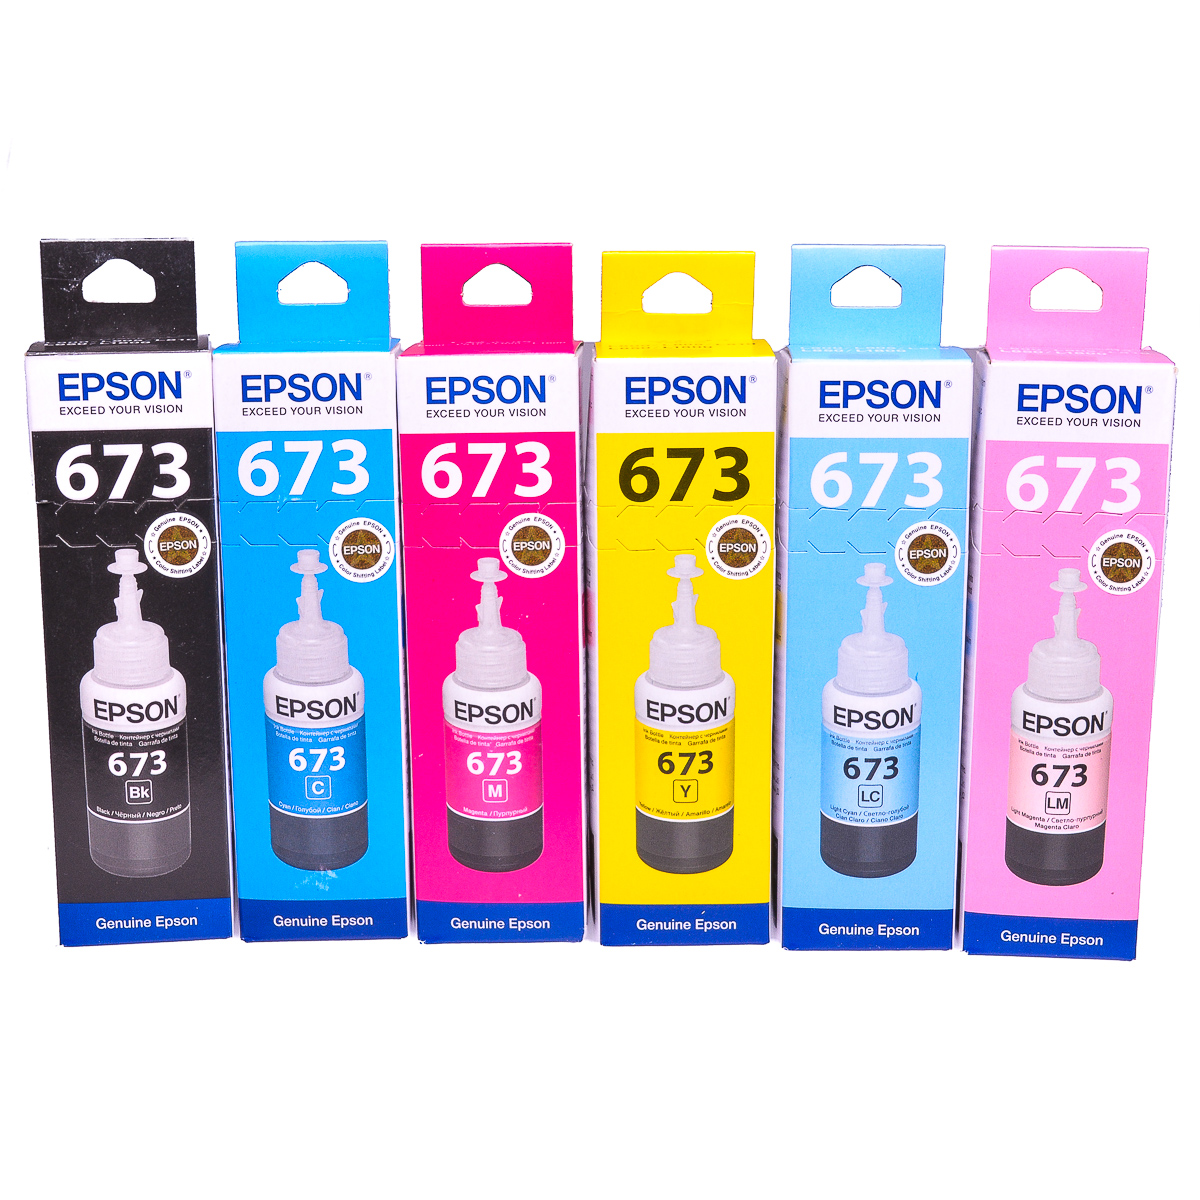 Genuine Multipack ink refill for use with Epson Stylus R265 printer